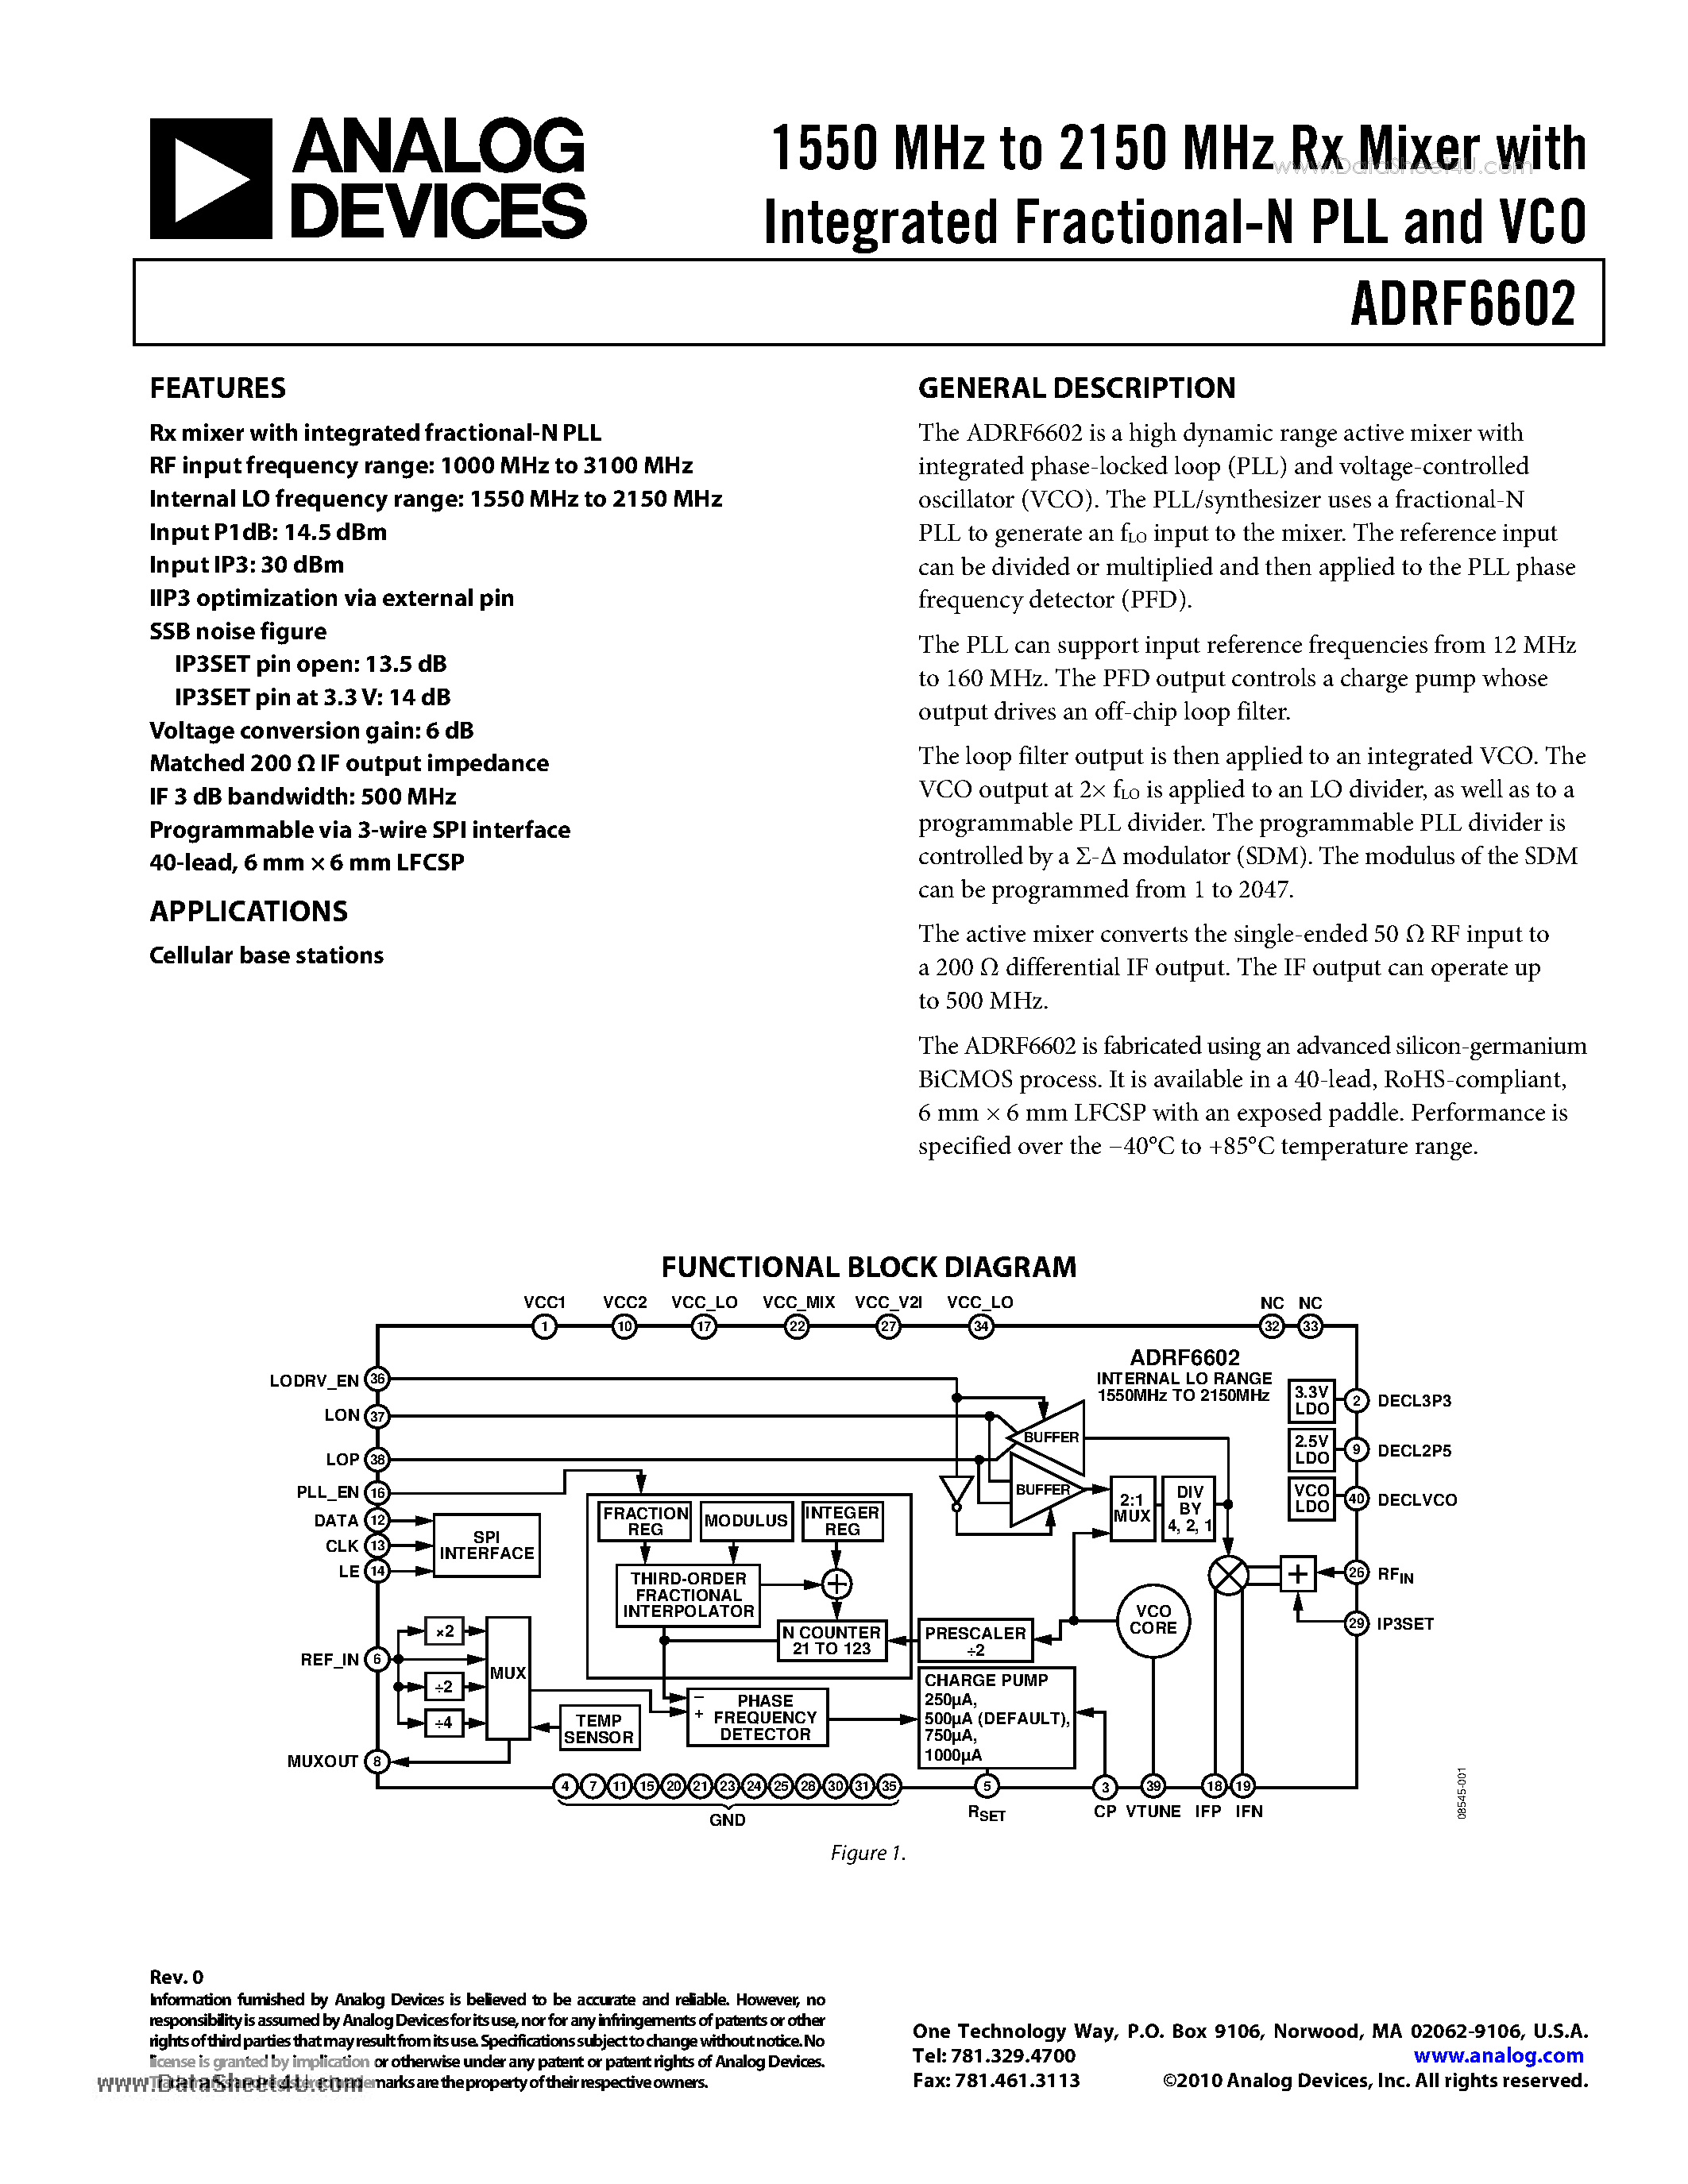 Datasheet ADRF6602 - 1550 MHz to 2150 MHz Rx Mixer page 1